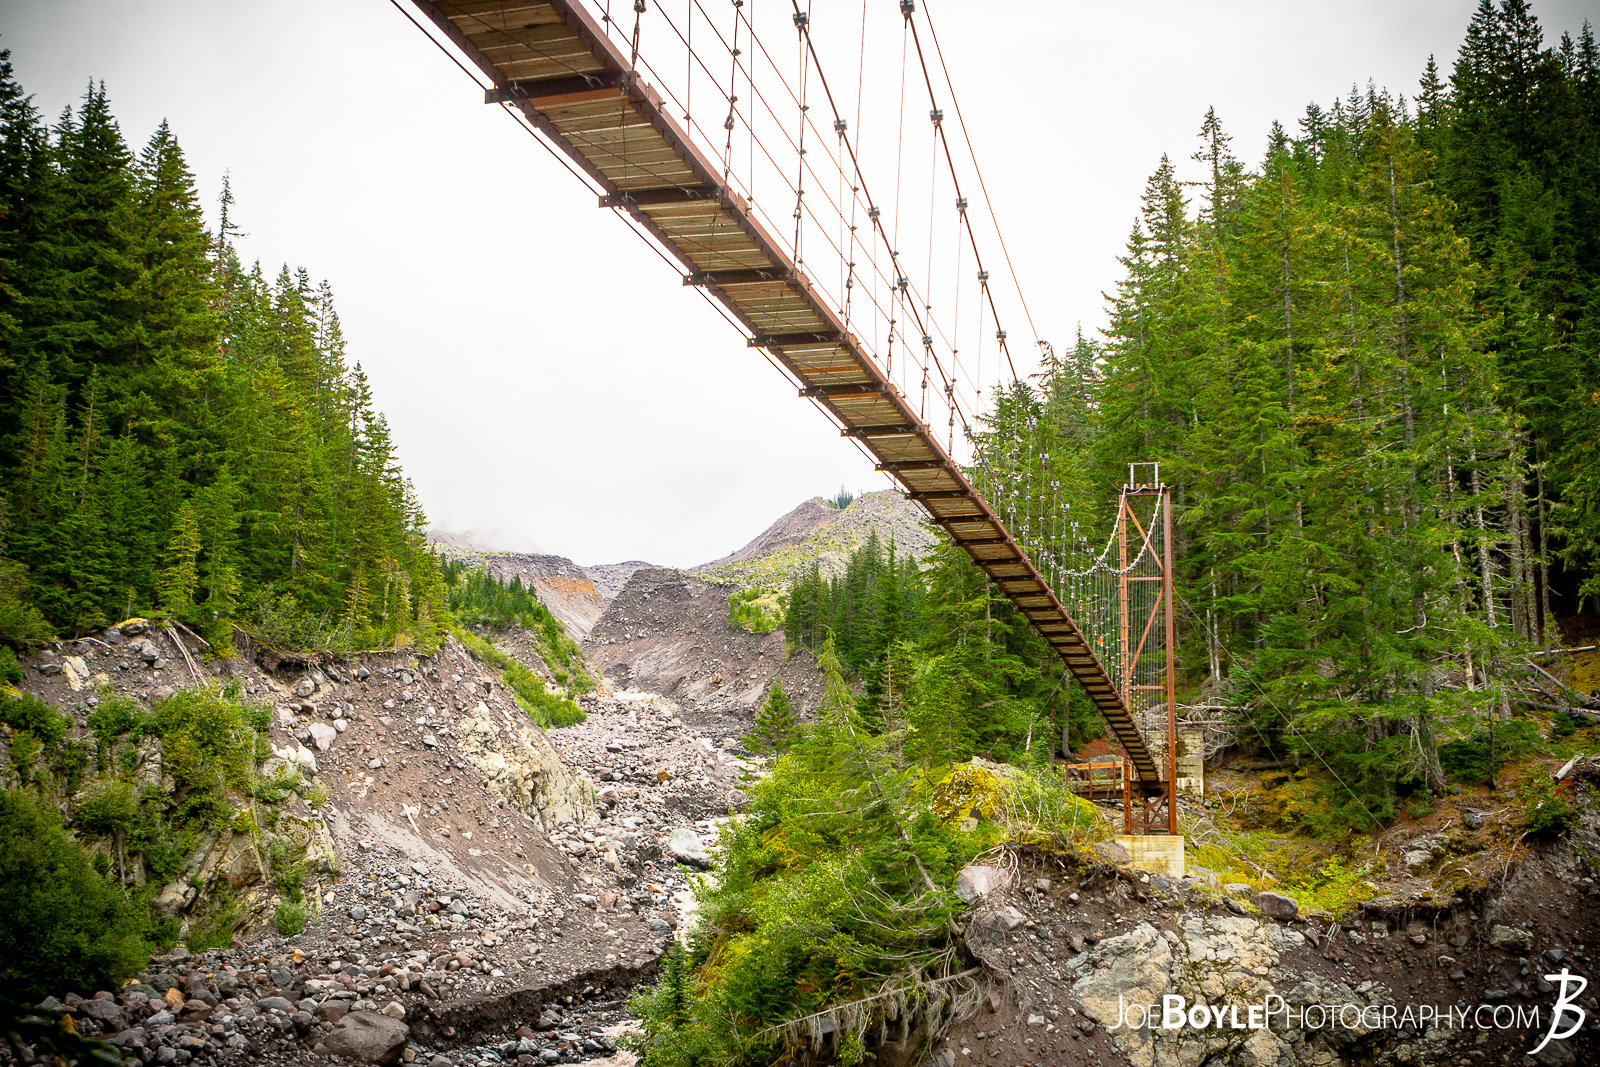  A photo of the neat looking Carbon River Suspension Bridge on the Wonderland Trail. I photographed this down the bank a little bit towards the river. 